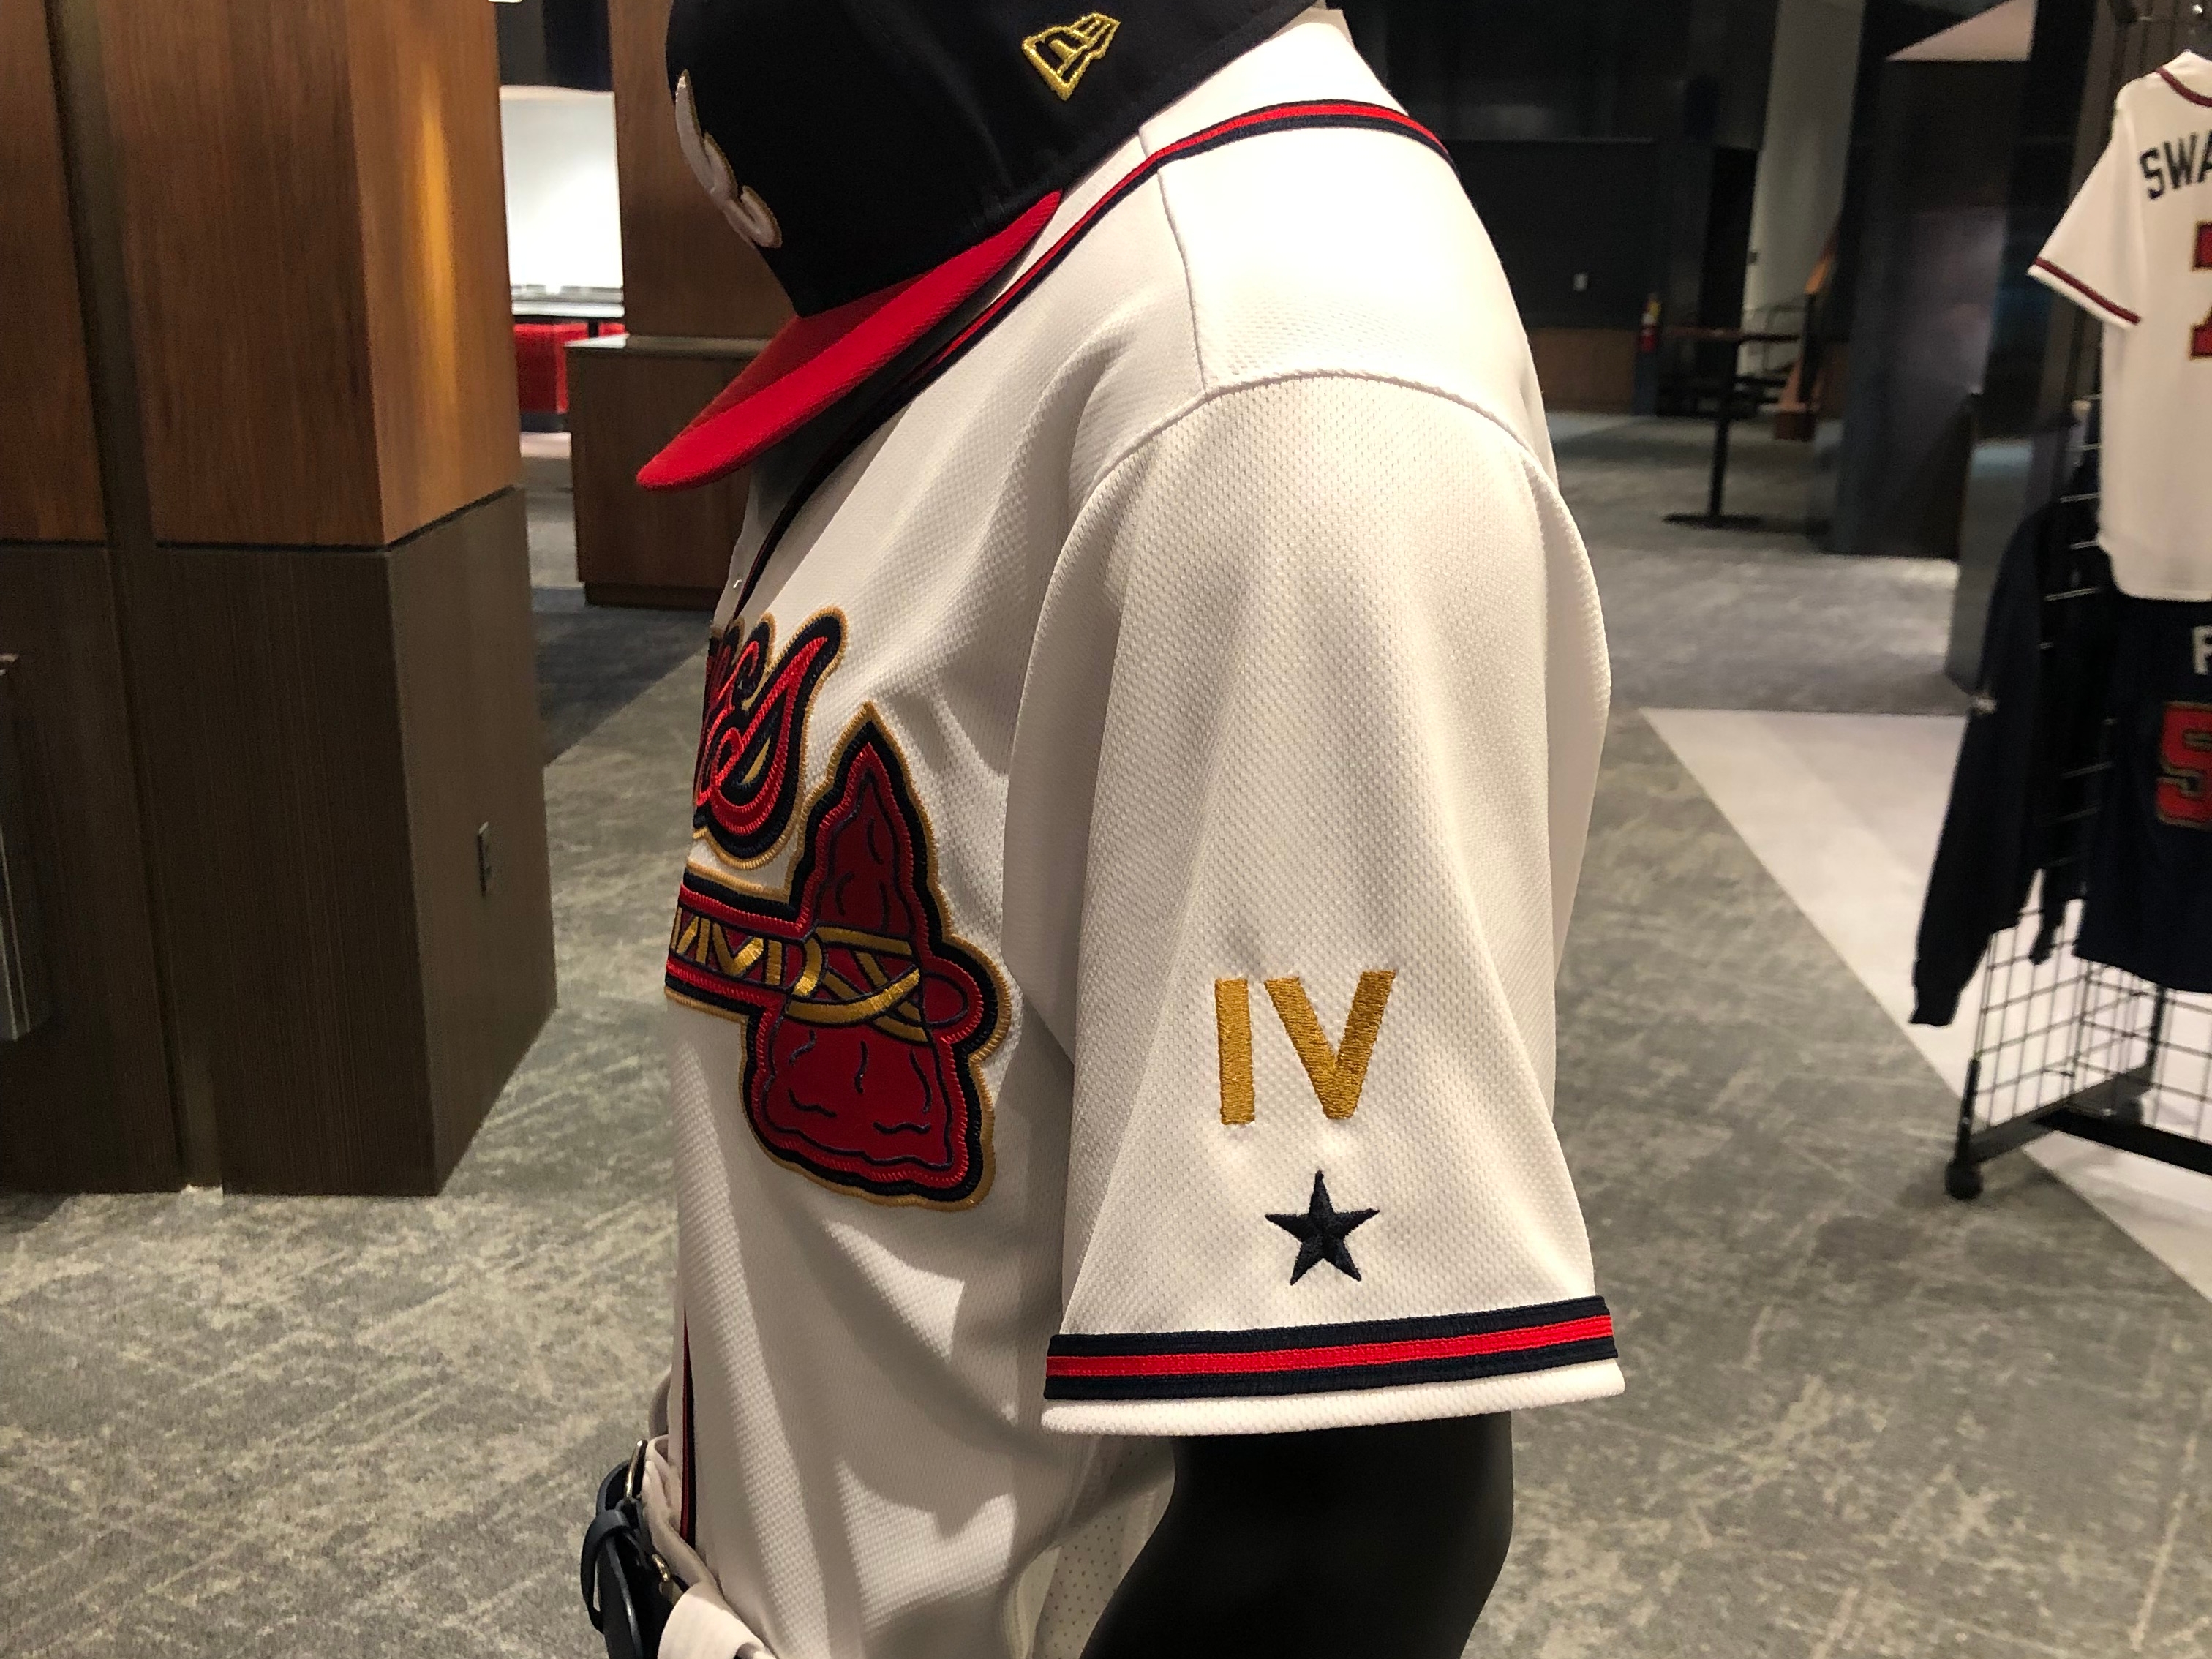 In uniform choice, Atlanta Braves go for the gold on season's first  homestand